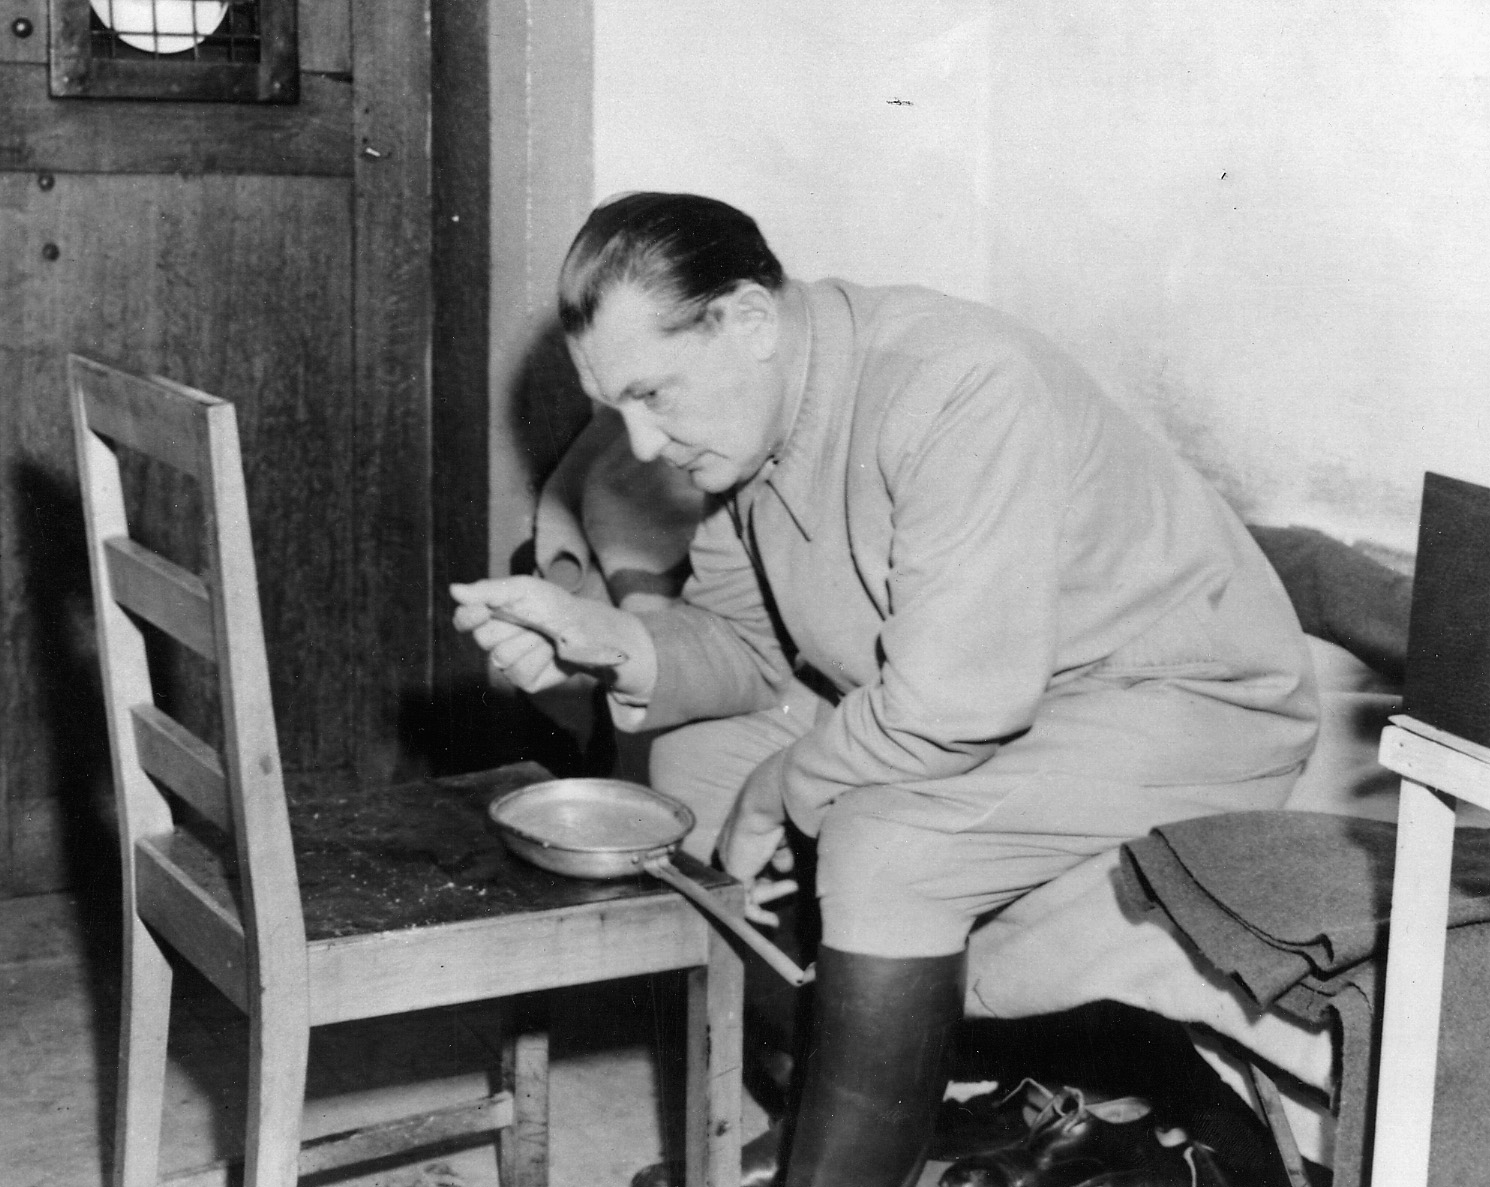 After bullying co-defendants in order to drag out the trial length, Göring was sentenced to eat his meals alone in a dimly lit, isolated cell.